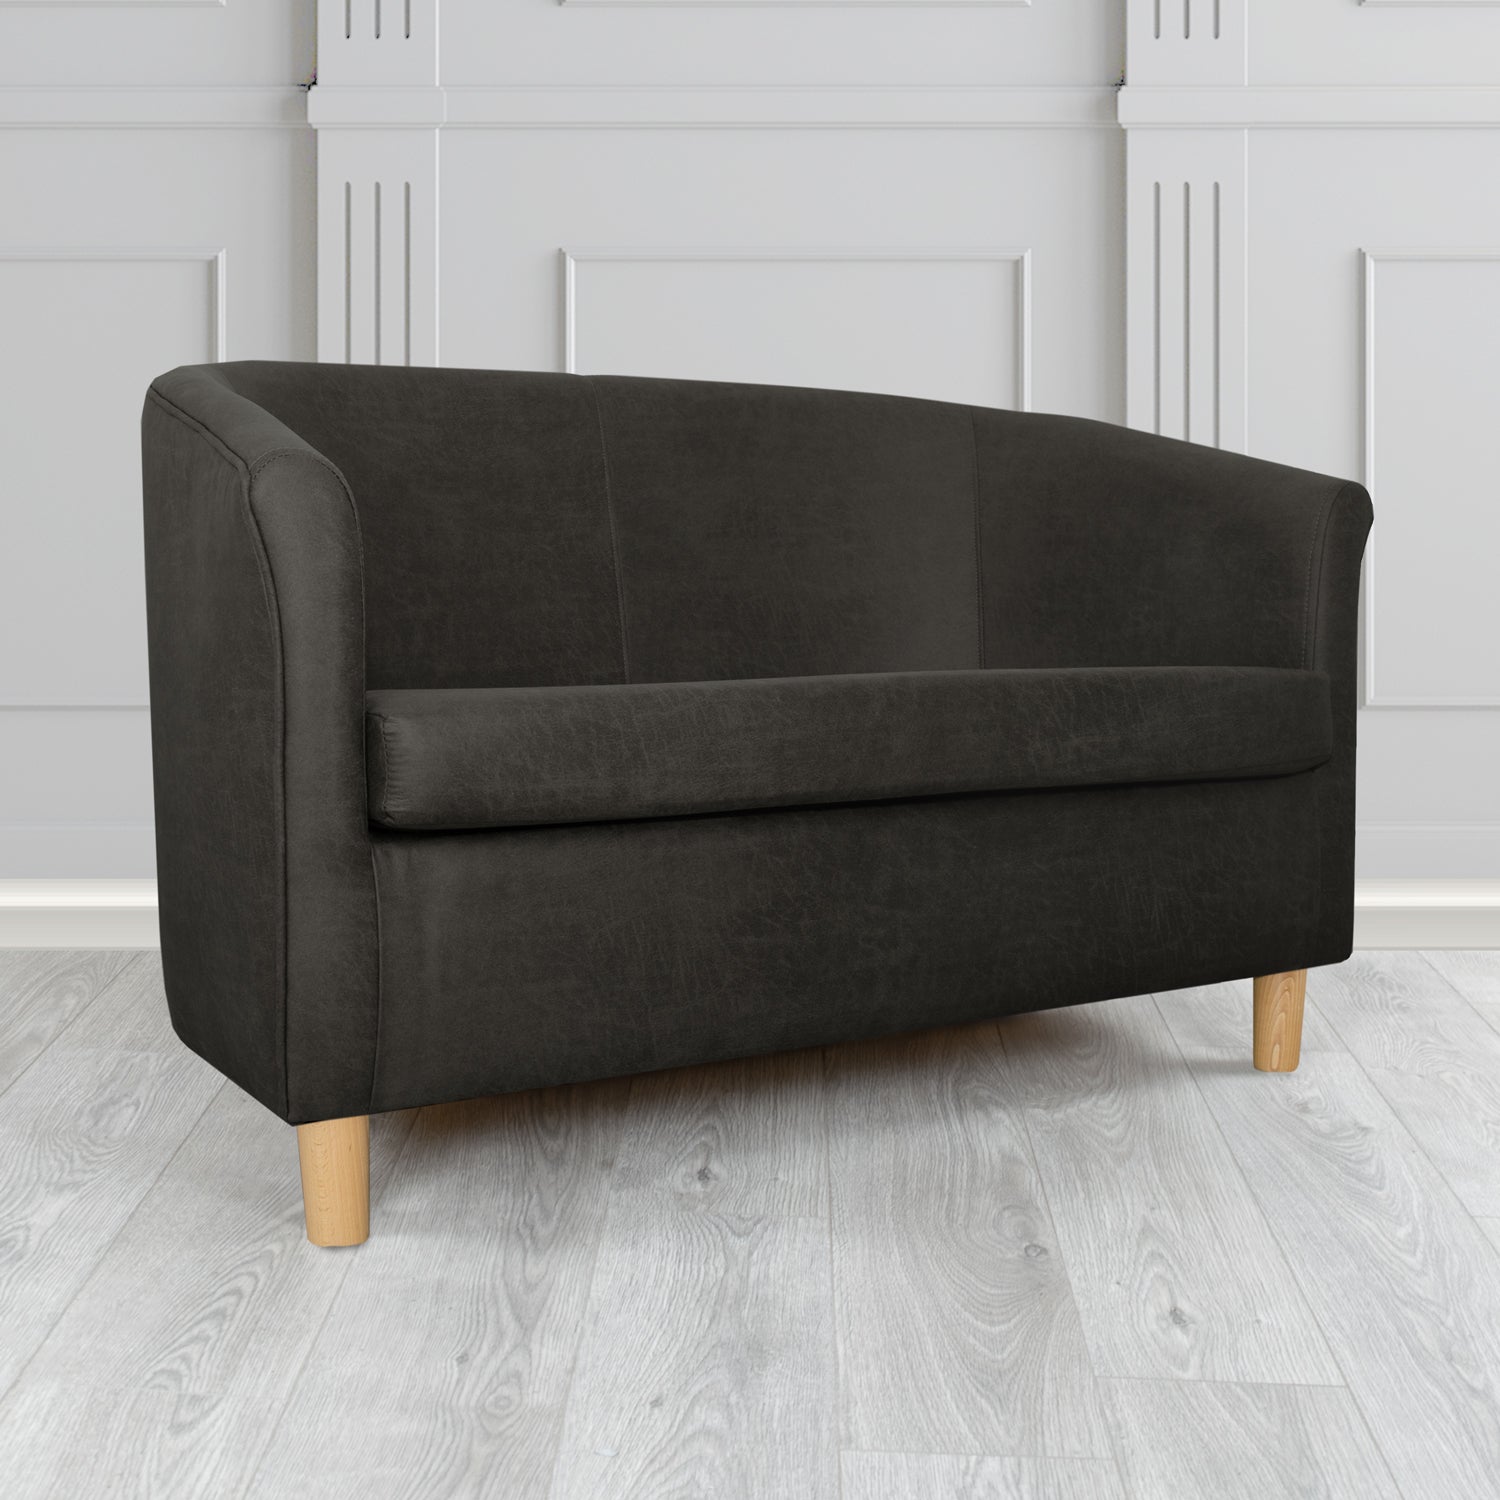 Tuscany 2 Seater Tub Sofa in Nevada Black Faux Leather - The Tub Chair Shop